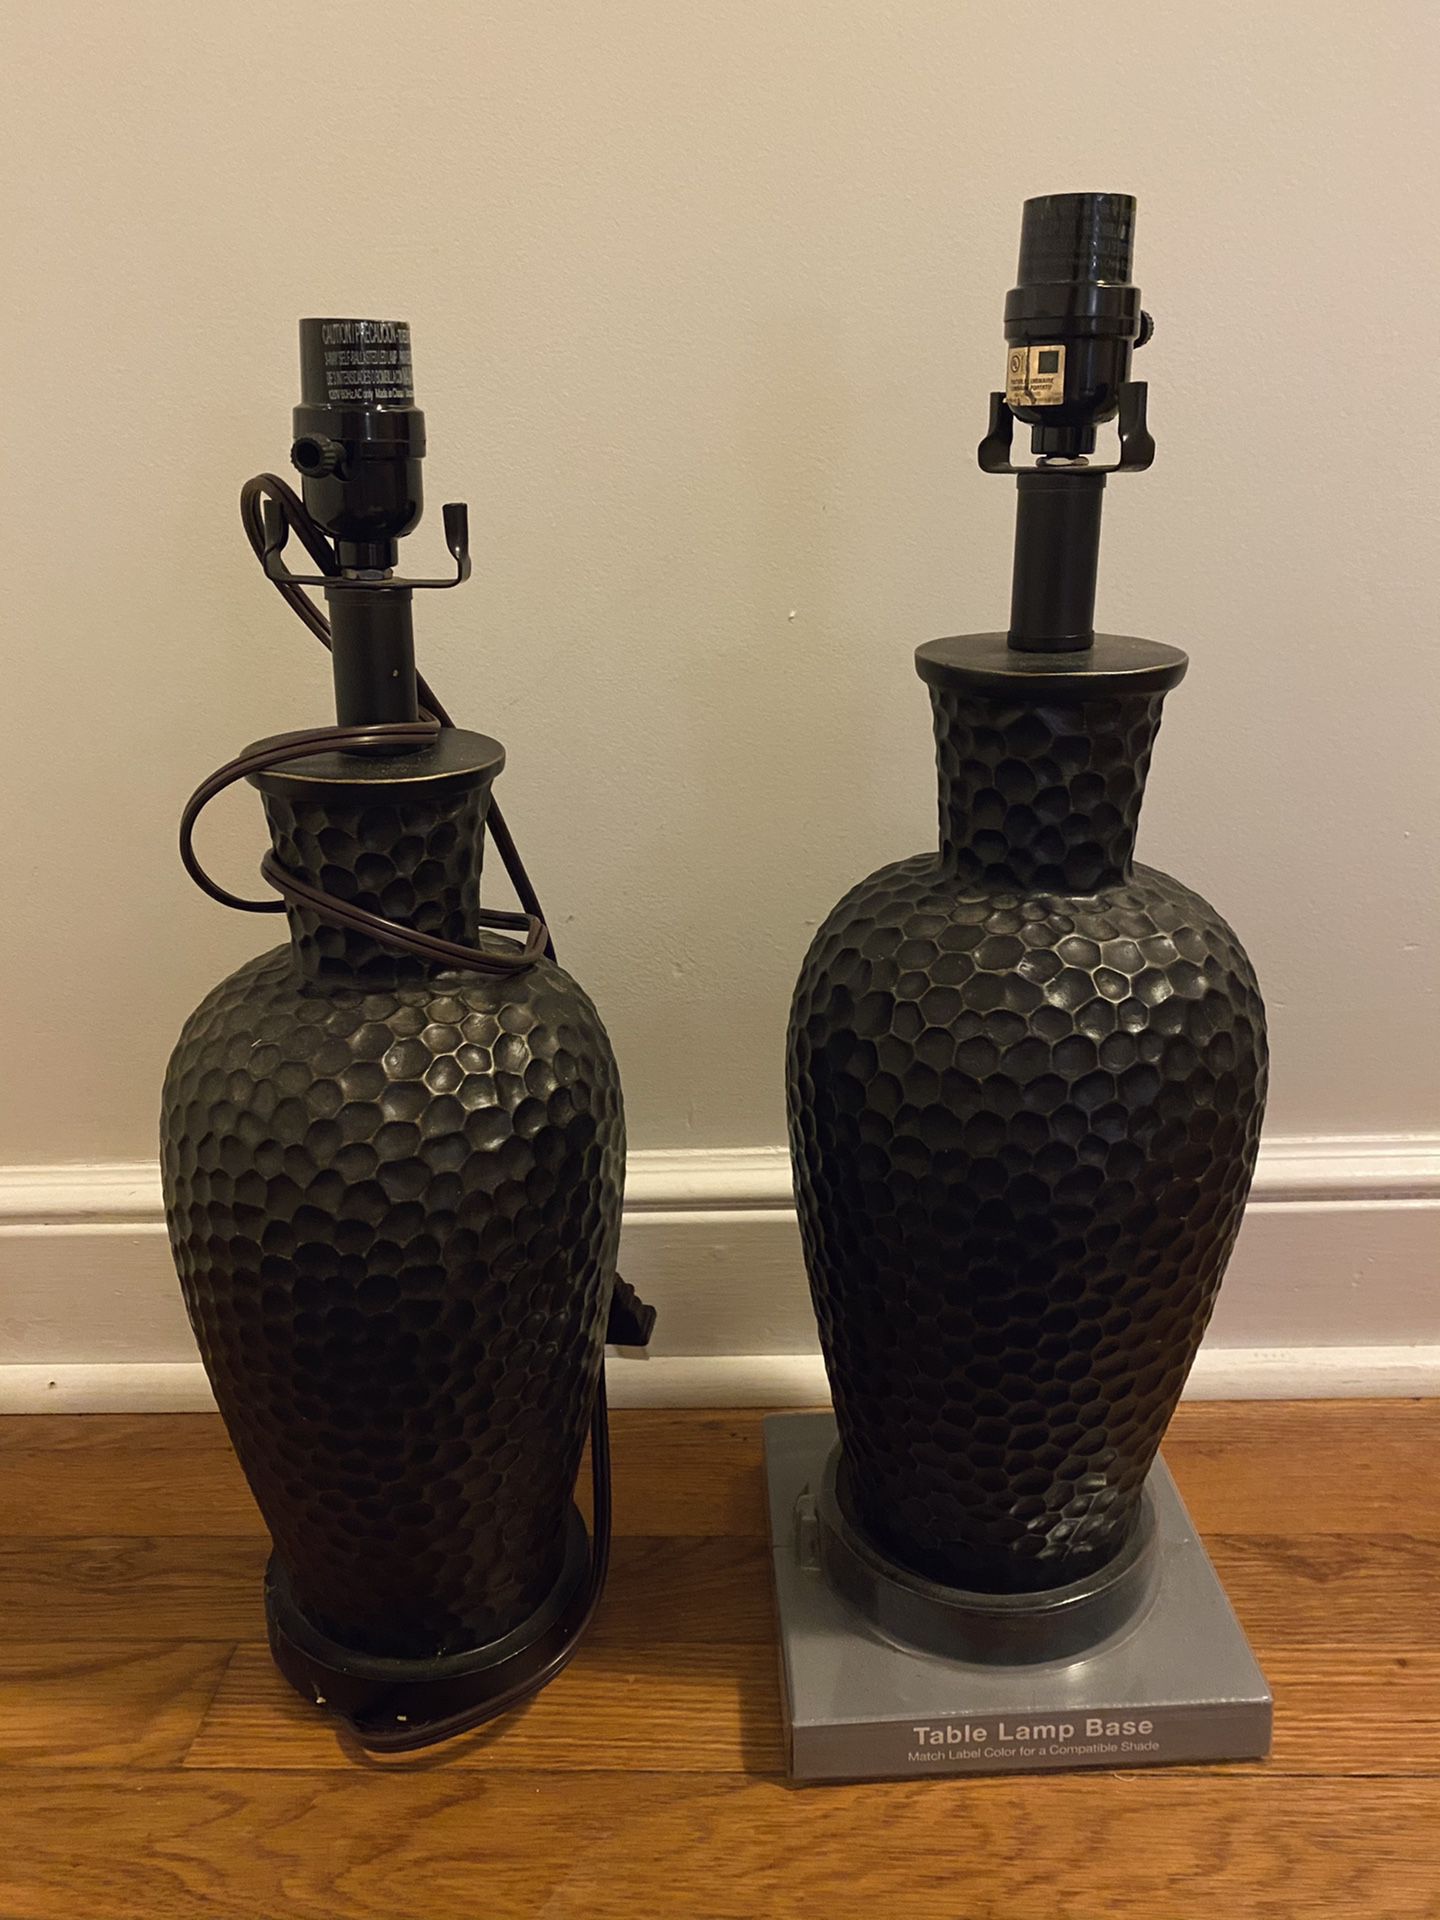 Set of two table lamp bases